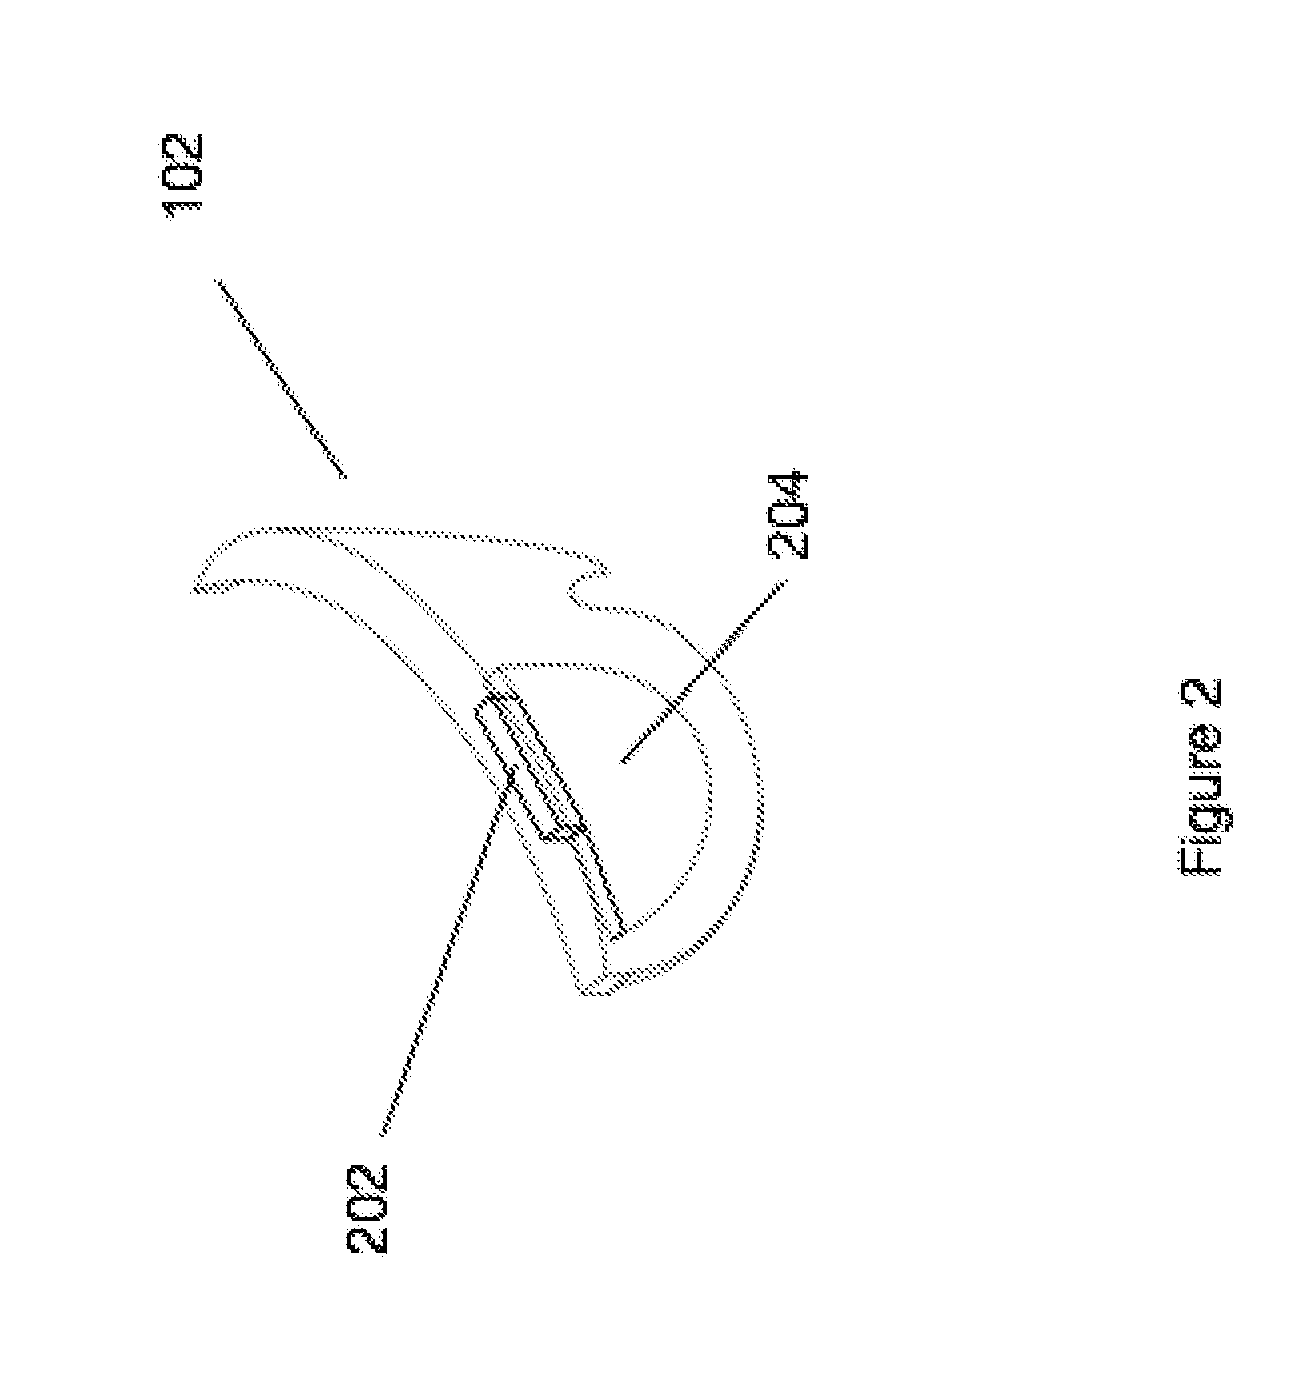 System for assisted operator safety using an hmd